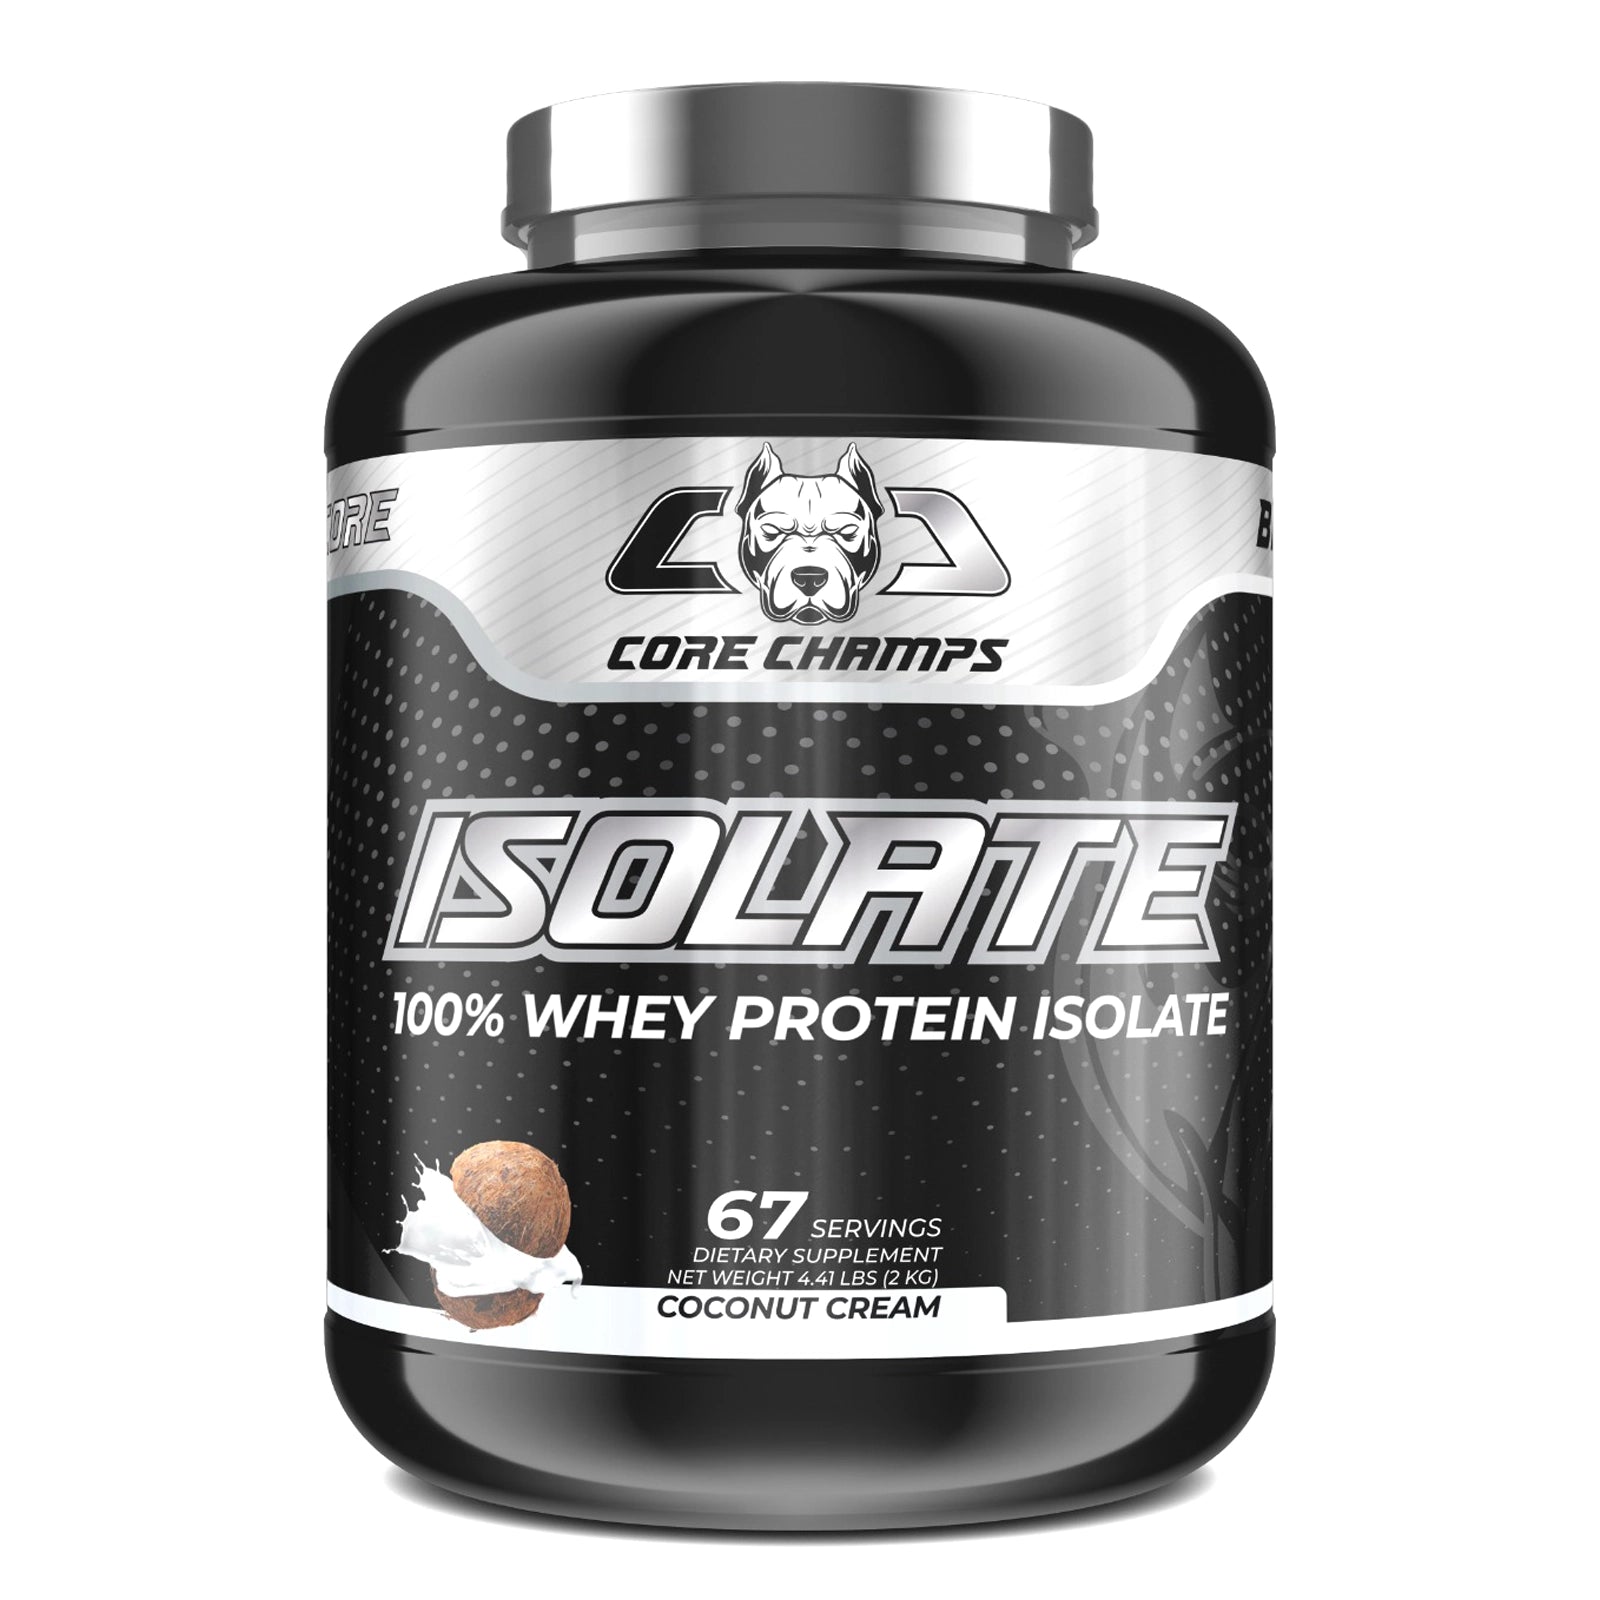 Core Champs ISOLATE 100% Whey Protein Isolate